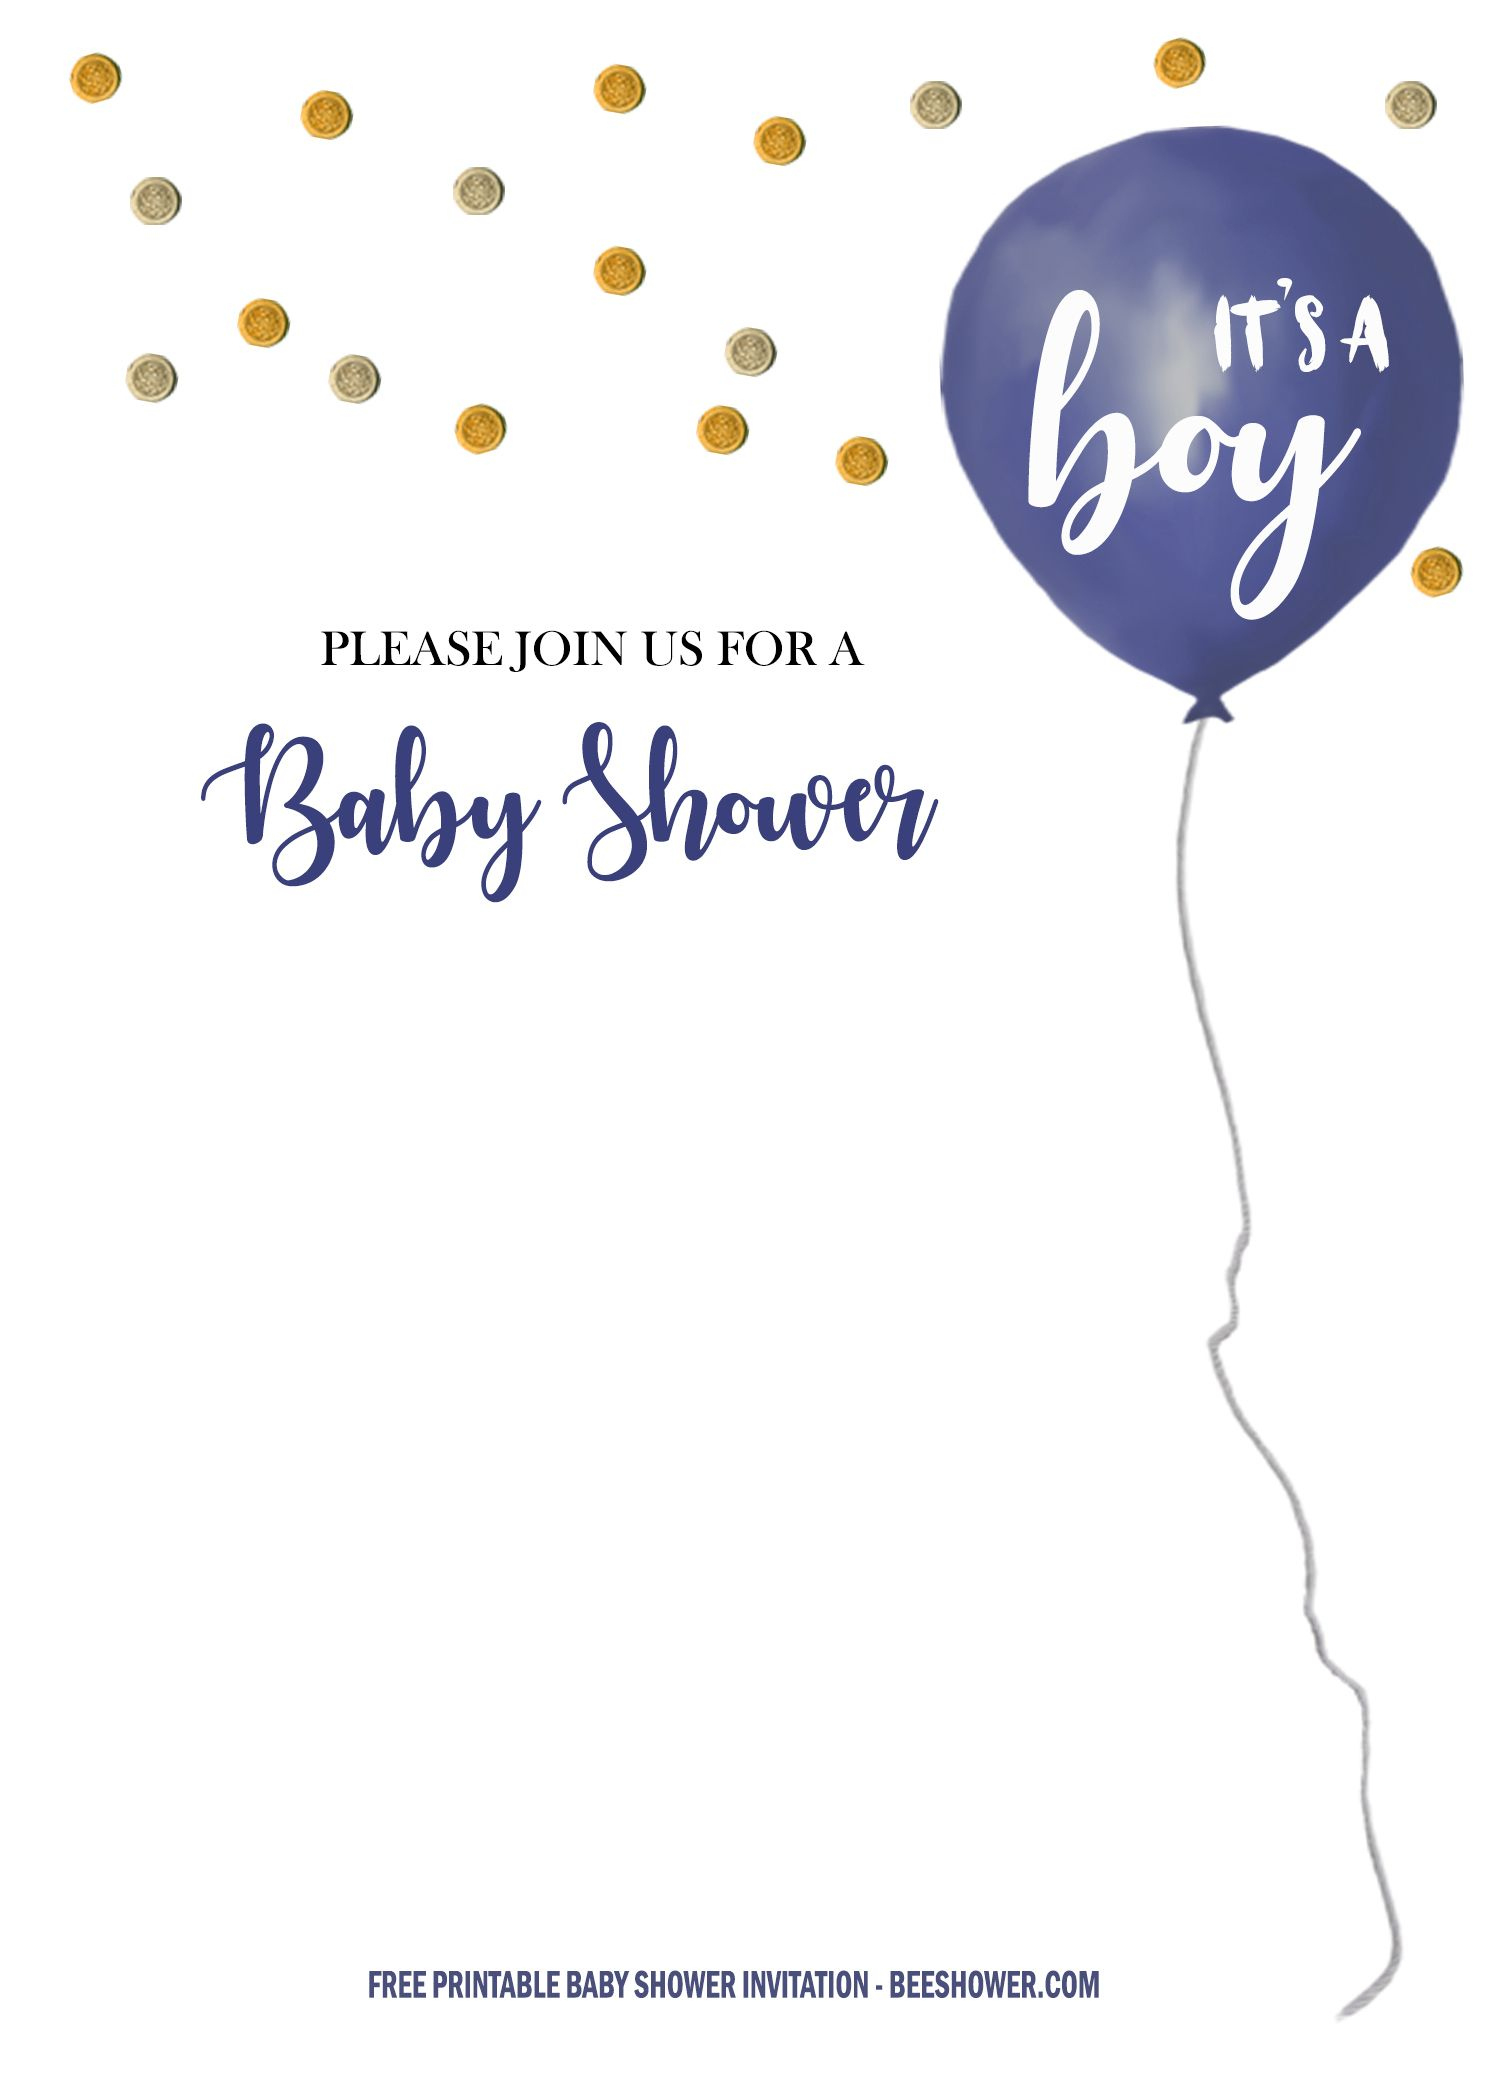 Free It'S A Boy Baby Shower Invitation Templates | Beeshower for Free Printable Baby Shower Invitations For Boys